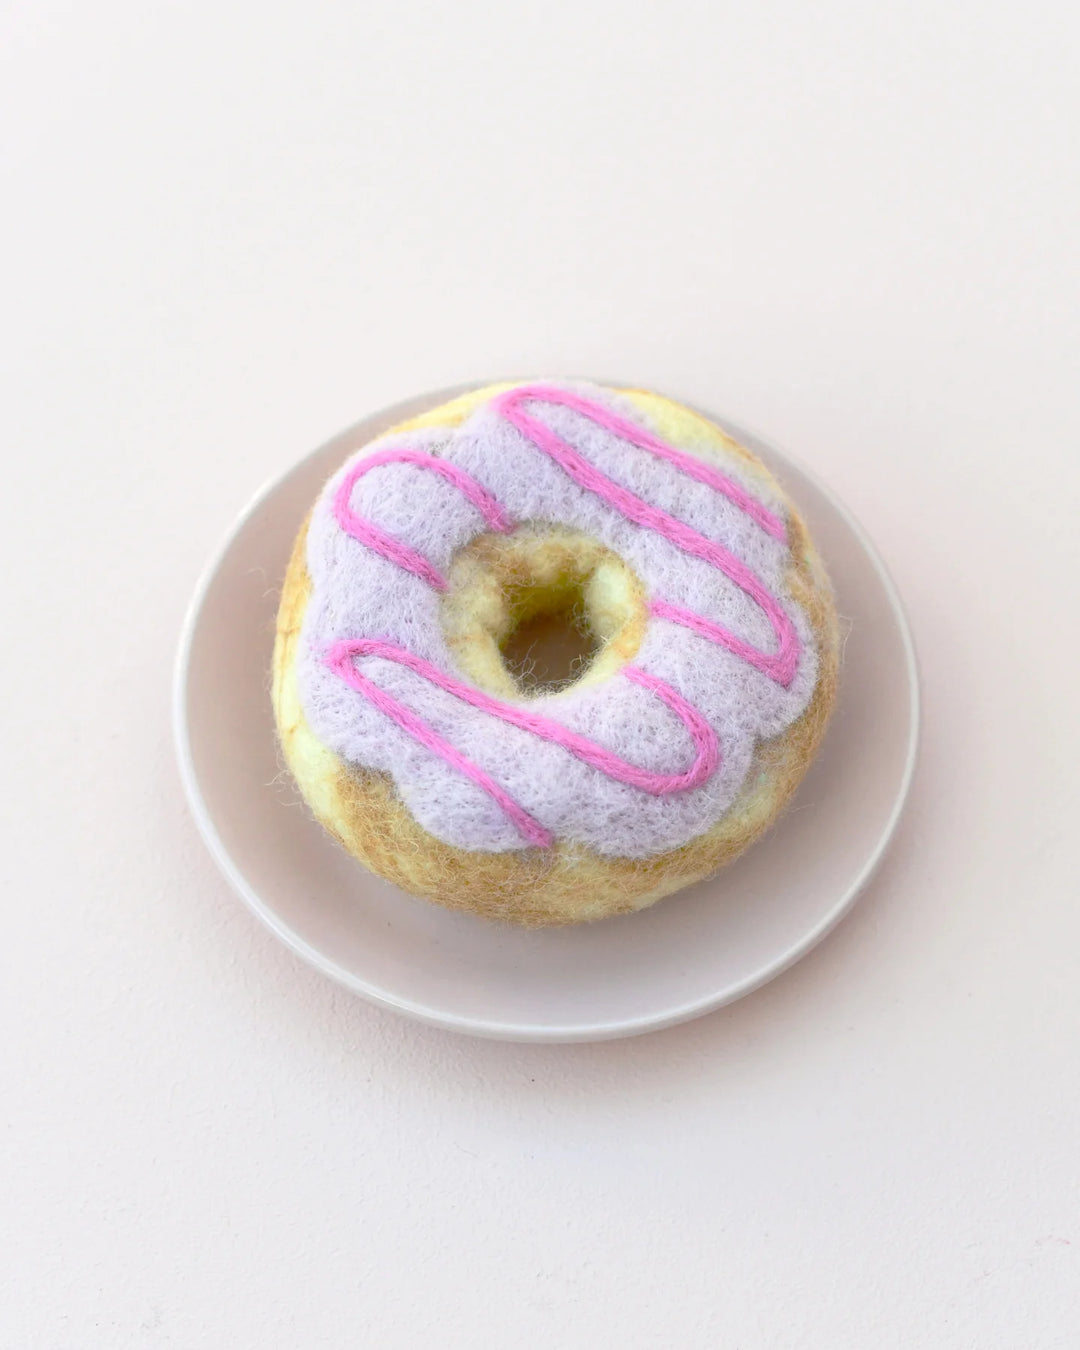 Felt Doughnut With Pastel Frosting And Pink Drizzle